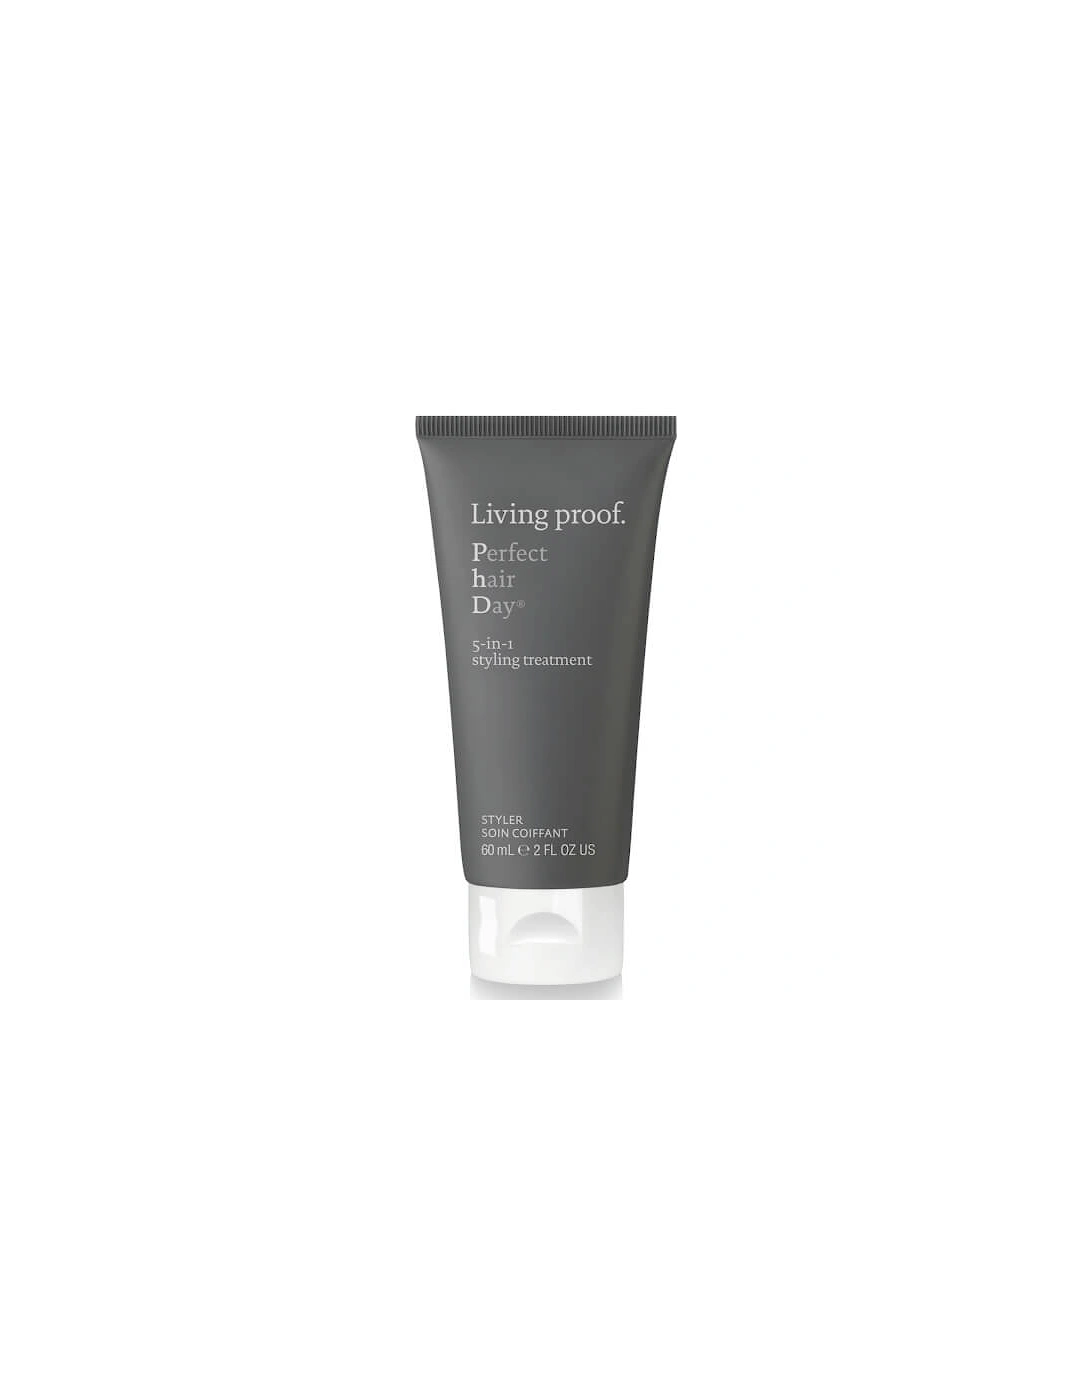 Living Proof Perfect Hair Day (PhD) 5-in-1 Styling Treatment 60ml, 2 of 1